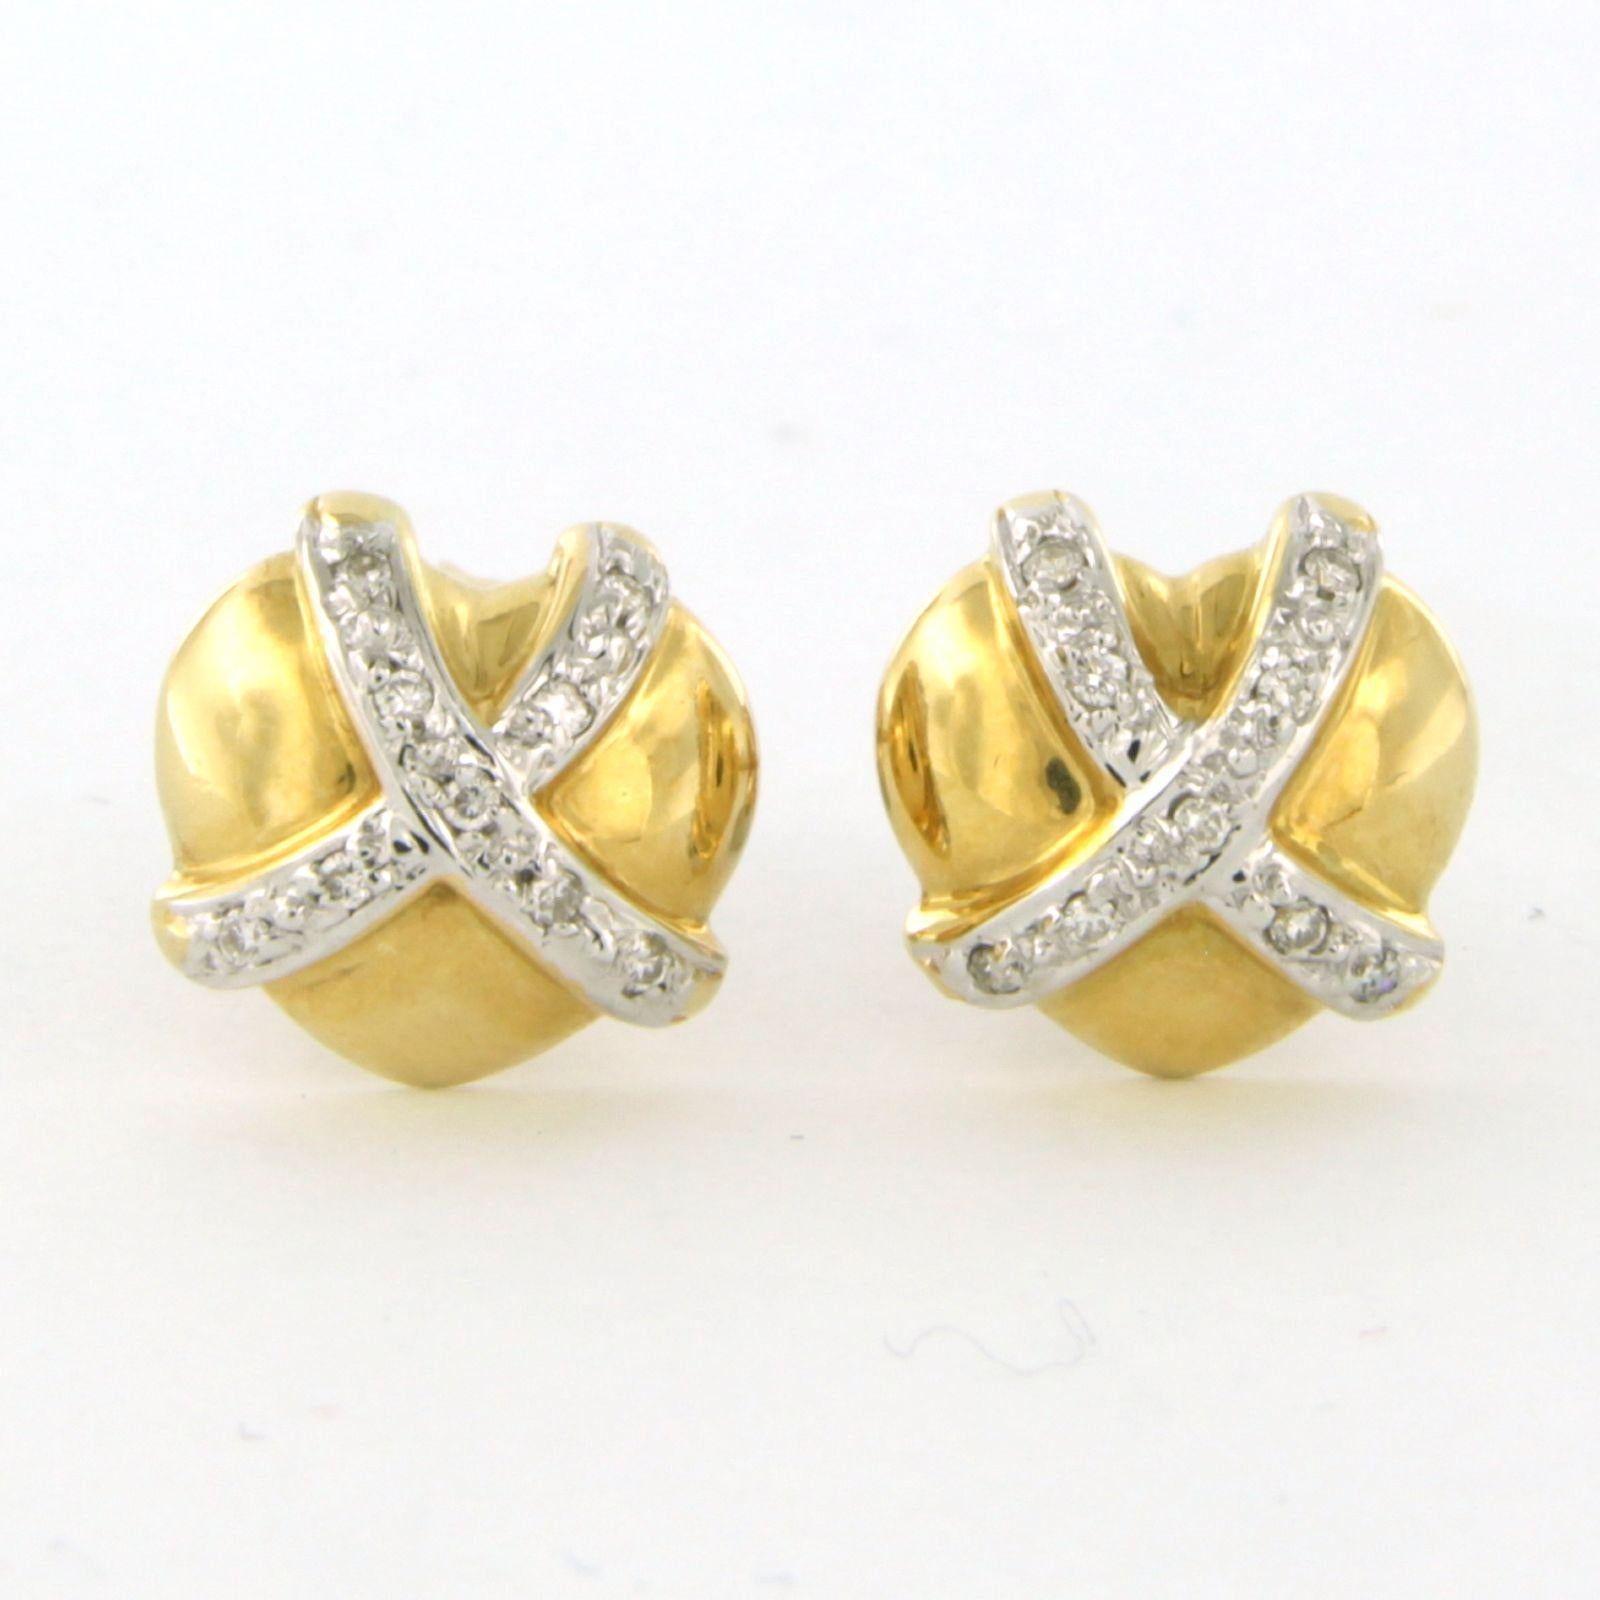 18k bicolour gold earrings set with brilliant cut diamonds up to. approximately 0.10 ct - F/G - VS/SI

detailed description:

the size of the earring is 1.1 cm high and 1.1 cm wide
 
Total weight 4.2 grams

set with

- 18 x 1.0 mm brilliant cut